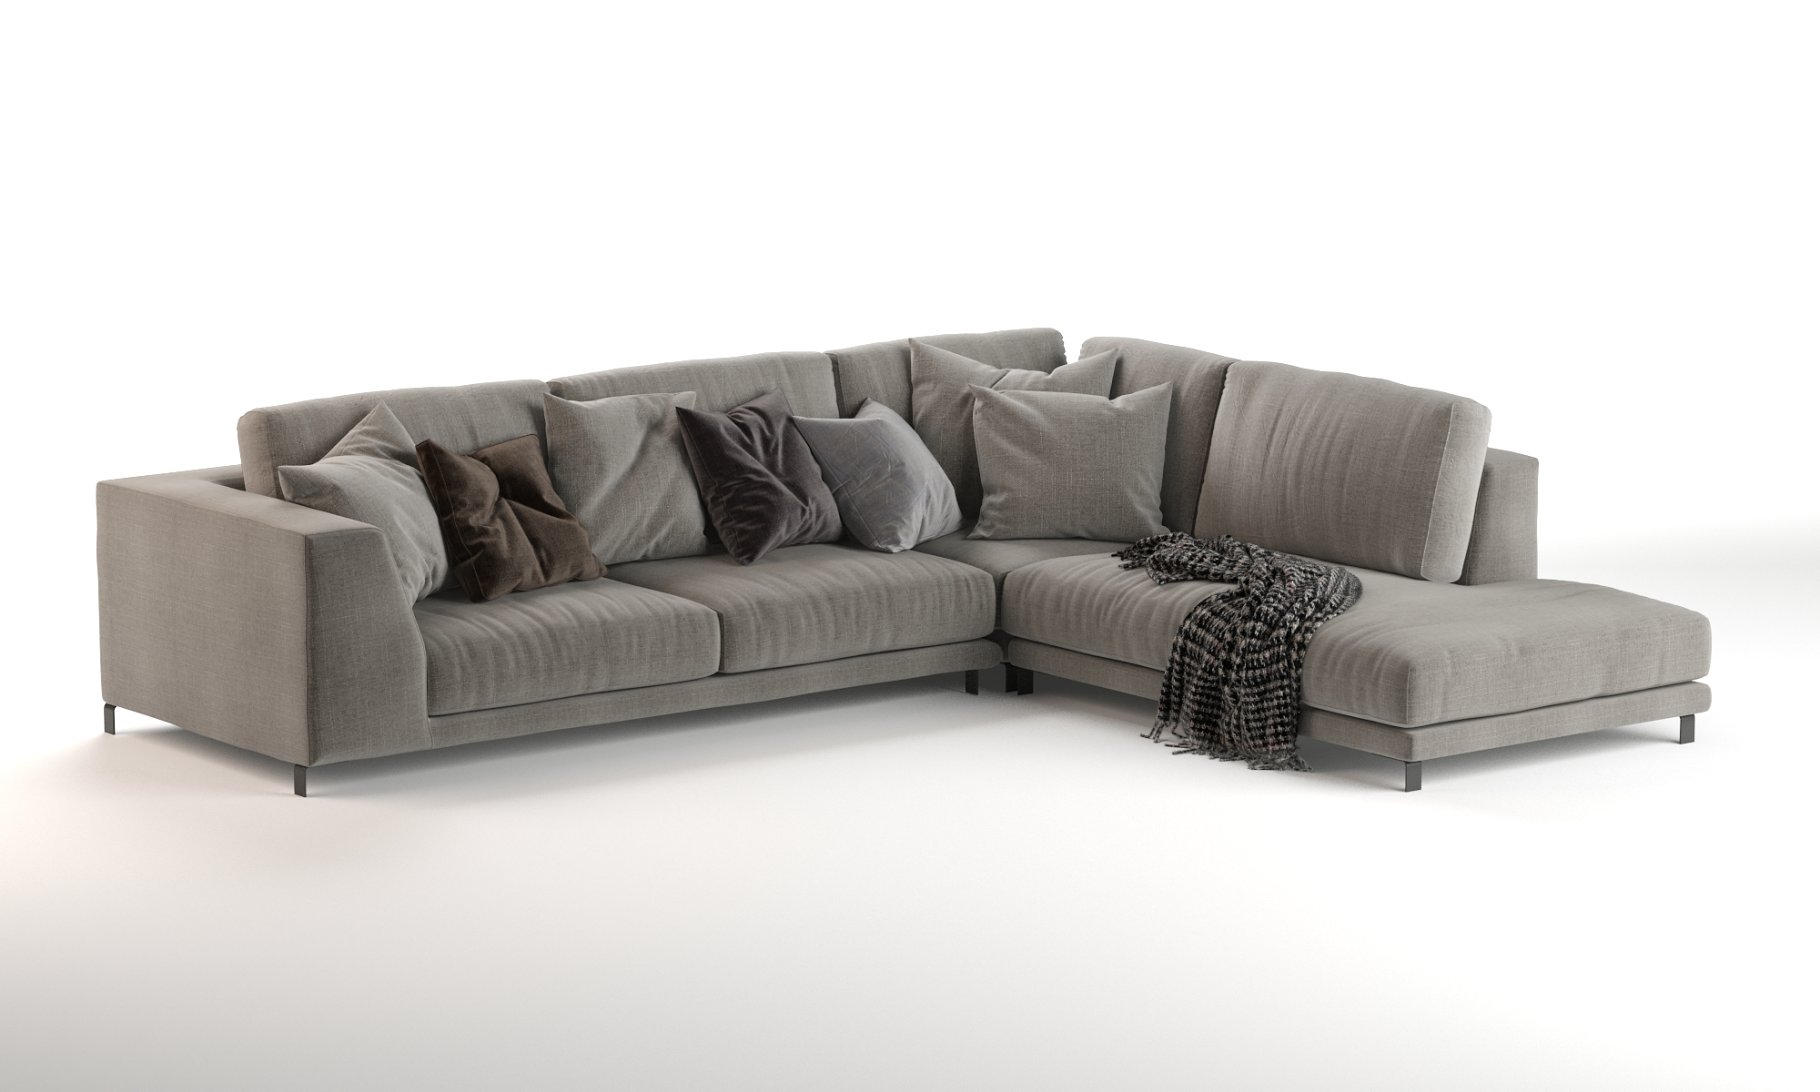 Gorgeous 3d rendering of a corner sofa